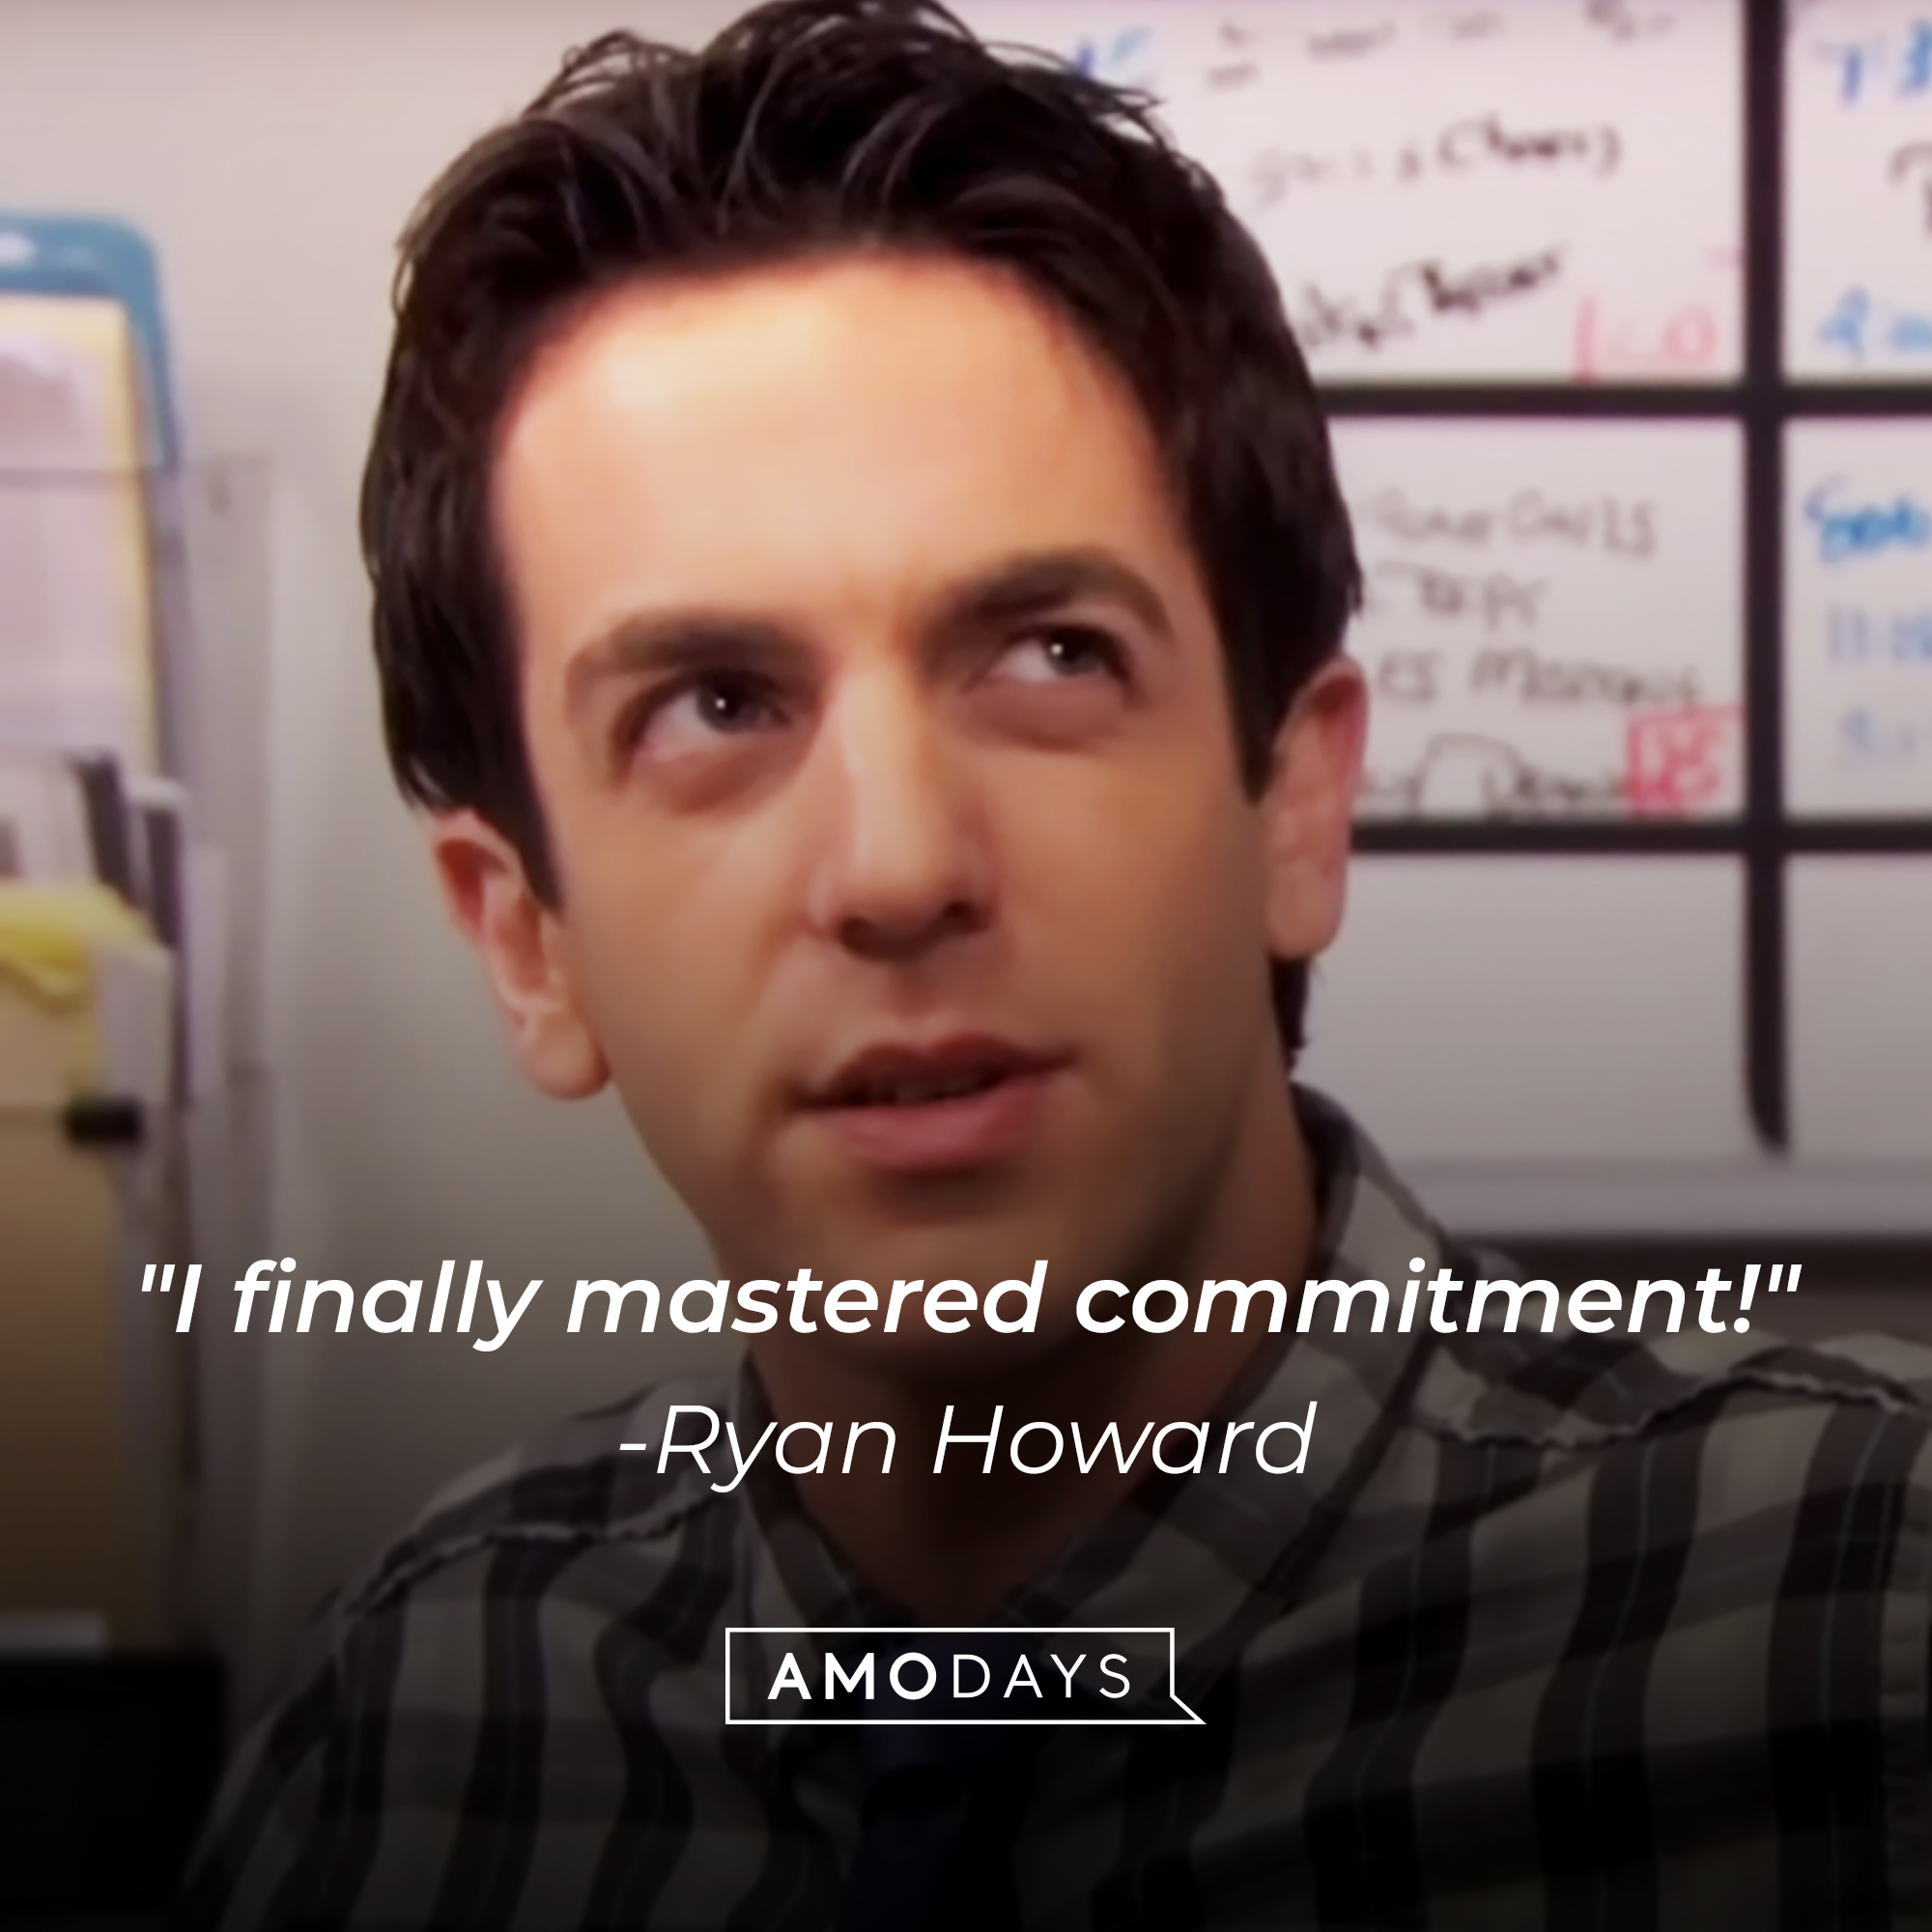 Ryan Howard's quote: "I finally mastered commitment!" | Source: YouTube/TheOffice